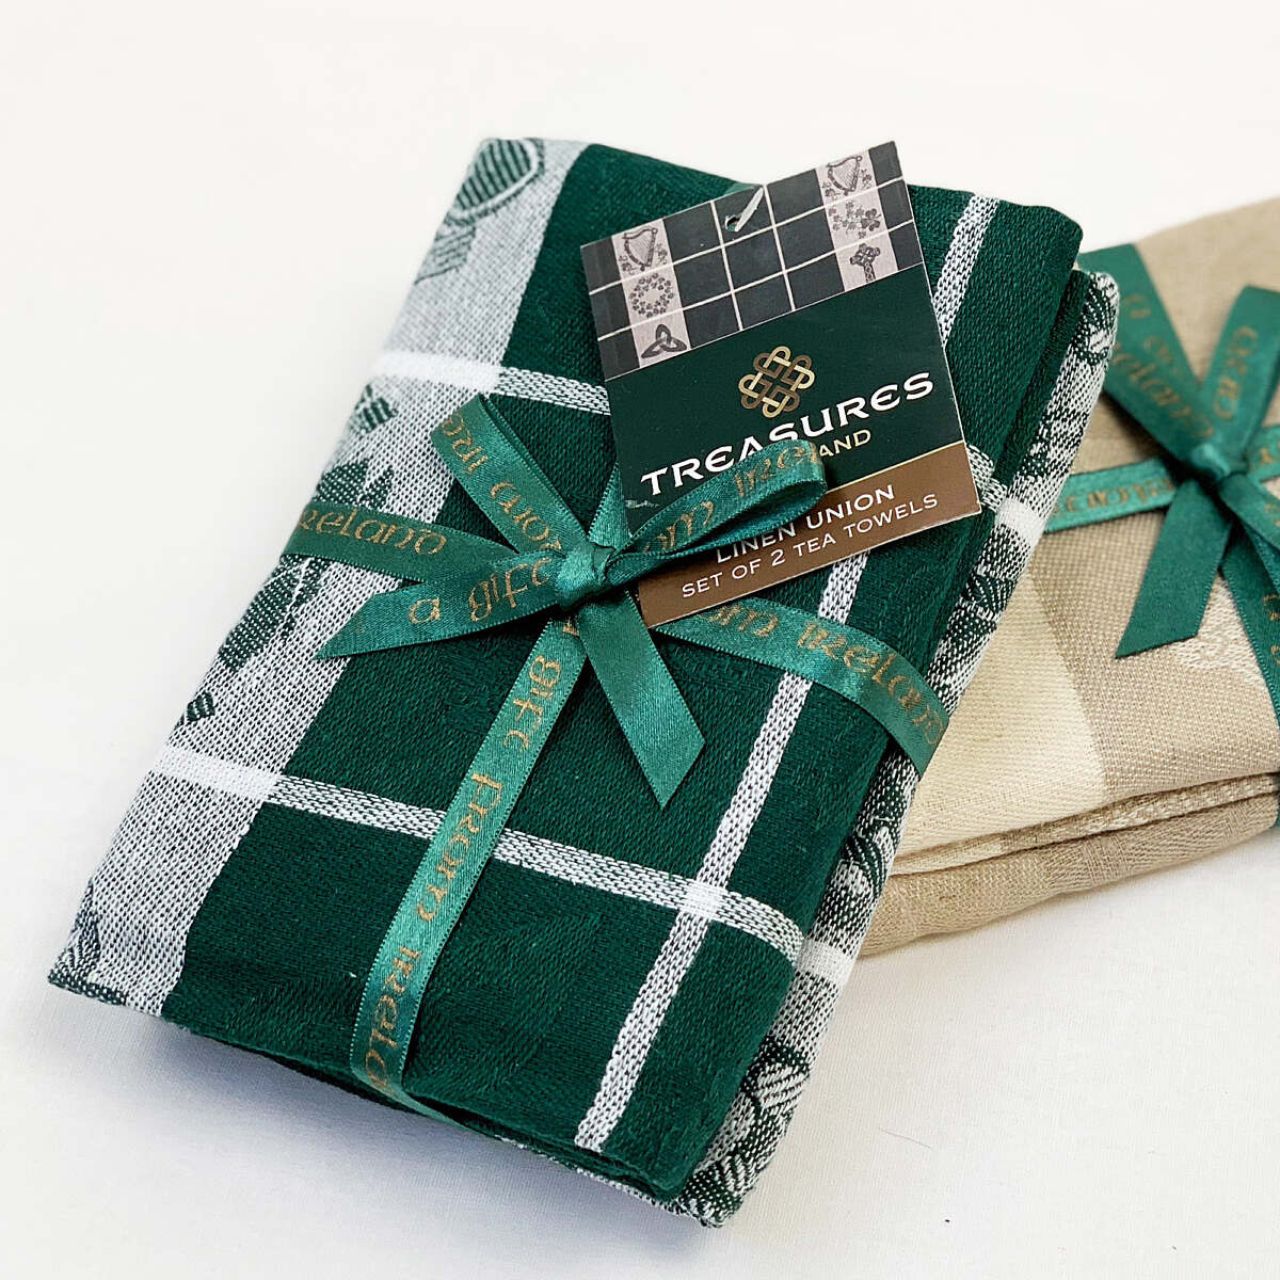 Treasures of Ireland Tea Towel Green by Samuel Lamont  Treasure of Ireland linen union tea towel in beautiful Irish green. This striking colourway comes as a bale of two, tied with elegant green ribbon. Perfect for gifting as a keepsake souvenir with it's iconic Irish symbols.